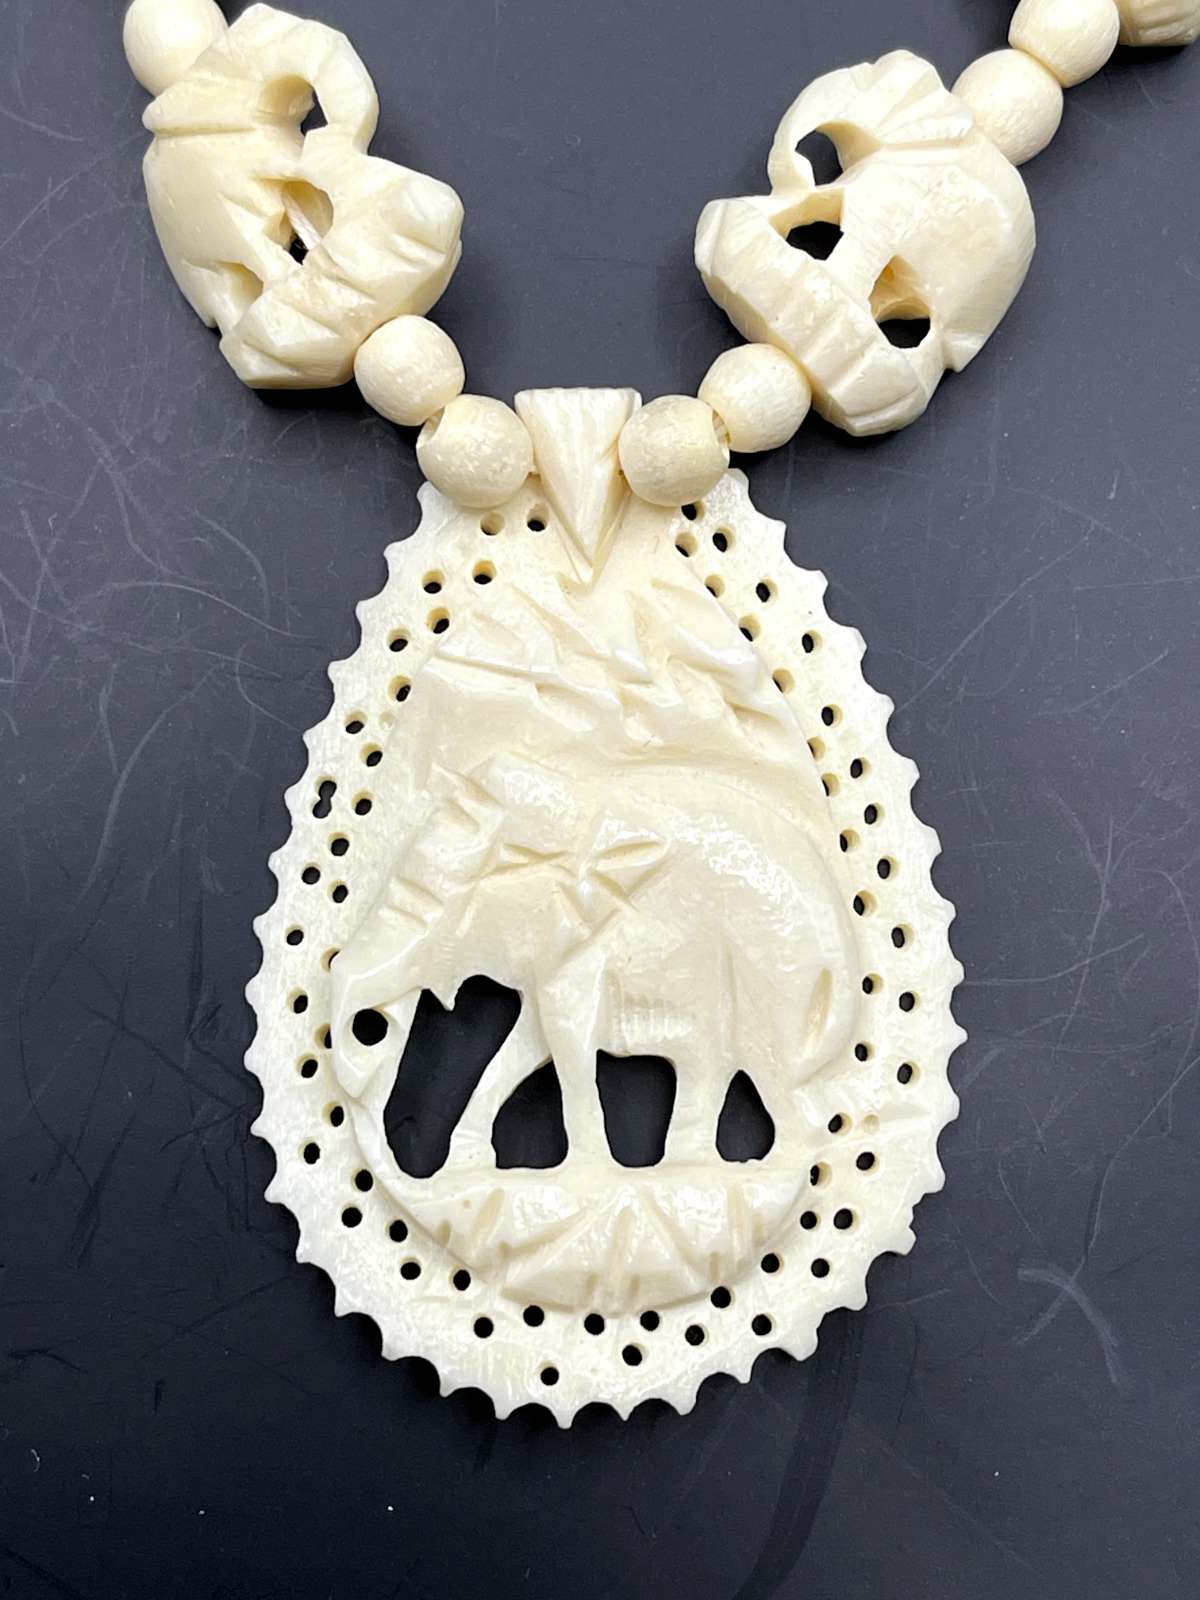 Vintage Carved Elephant Cameo Necklace 1950s Celluloid Pendant Cream